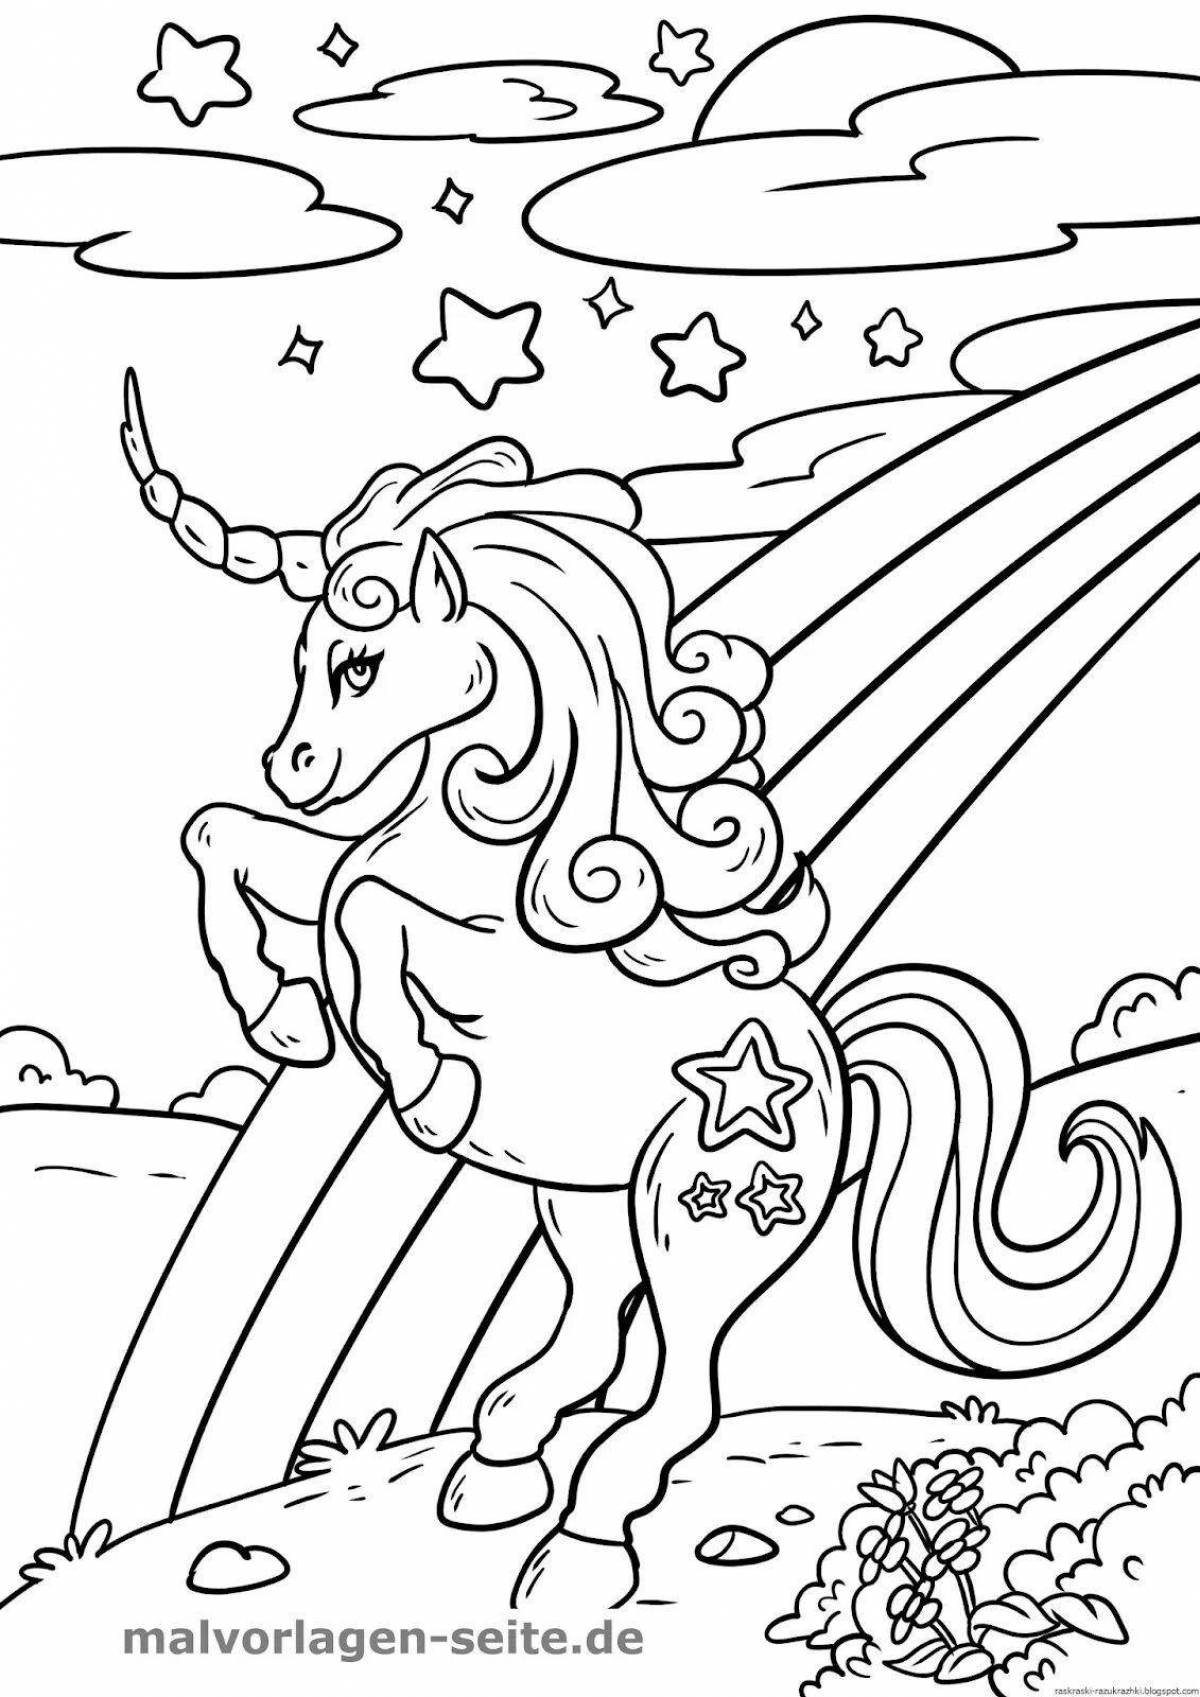 Exquisite unicorn coloring book for 5 year old girls